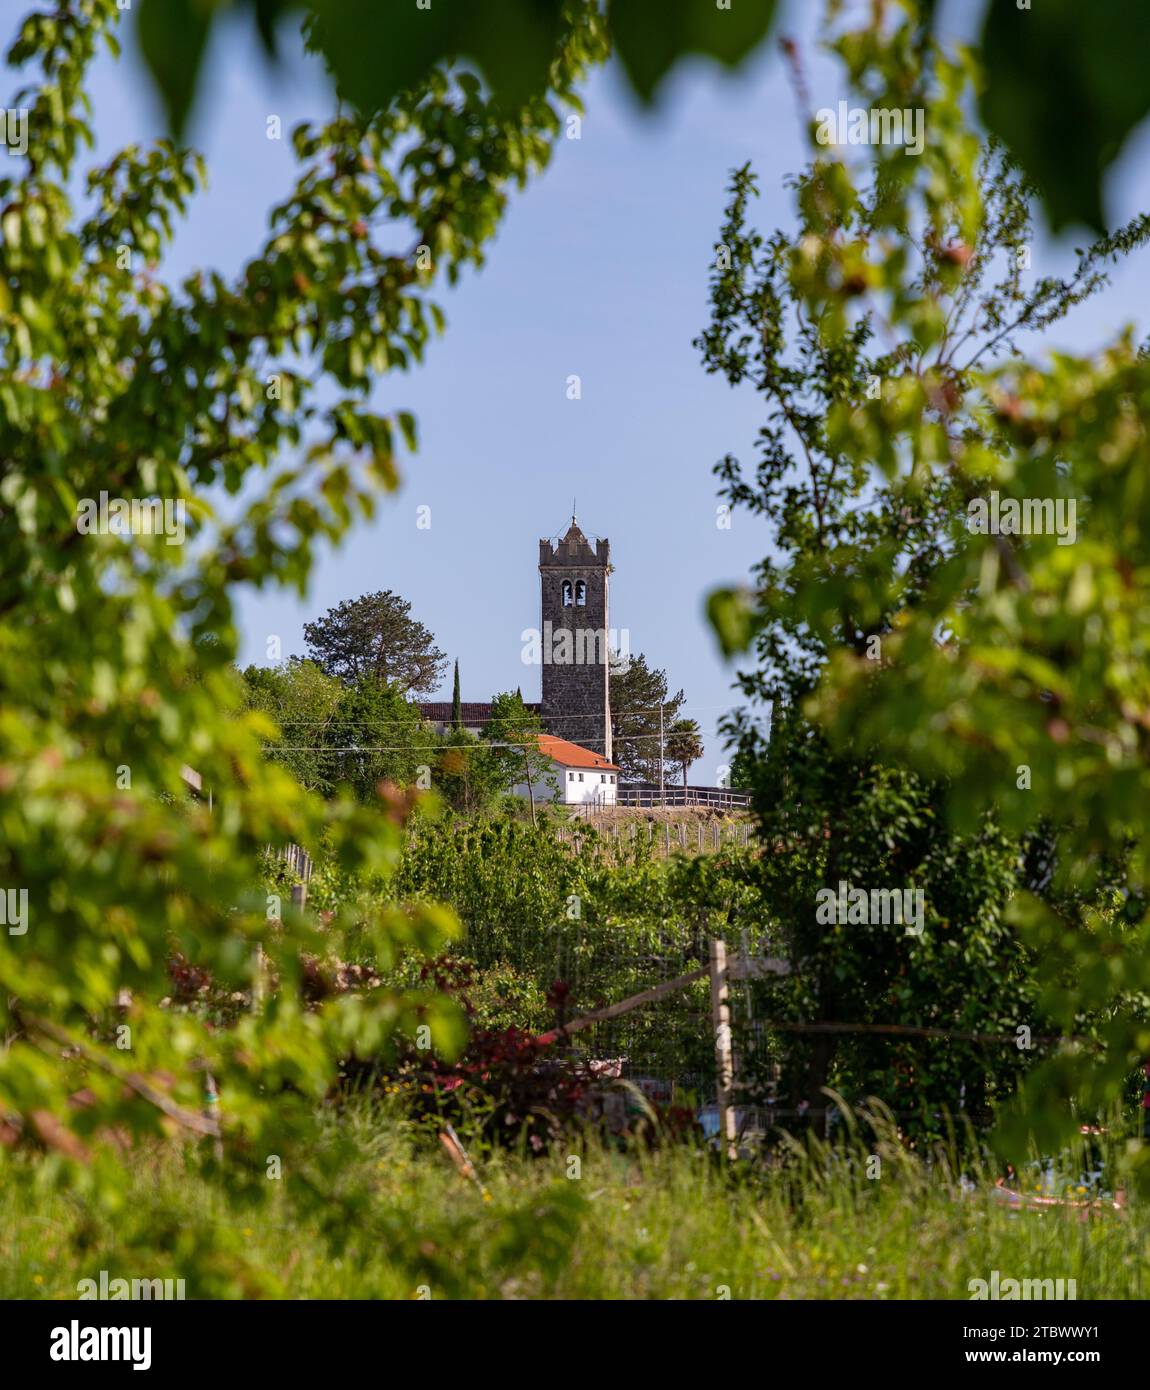 A picture of the tower of the Saint Cross Church as seen from nearby greenery (Kojsko) (Slovenia) Stock Photo